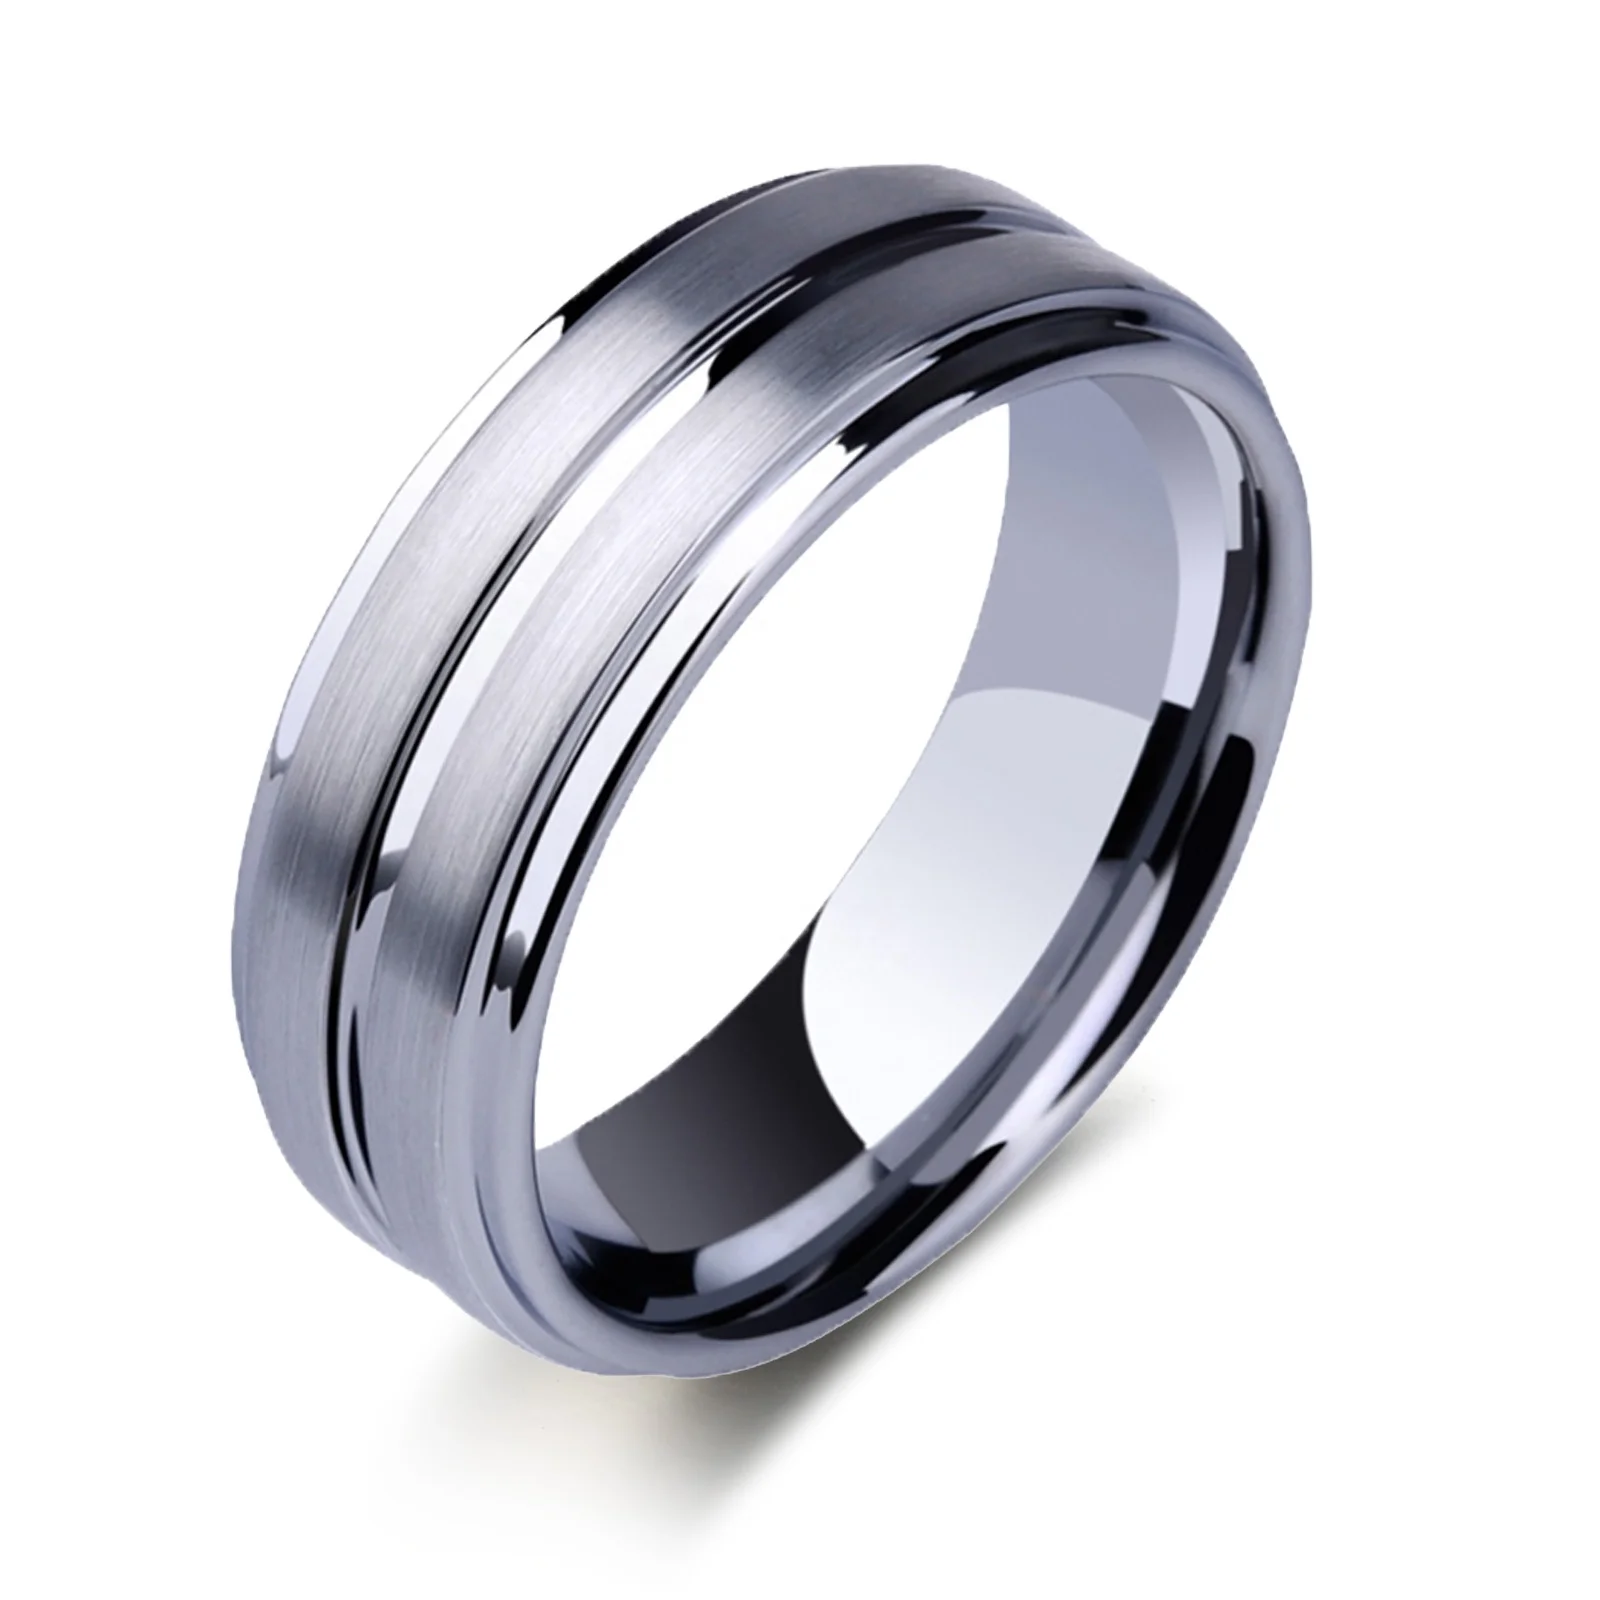 

Newshe Tungsten Carbide Rings For Men Groove Ring 8mm Mens Wedding Band Charm Jewelry Gift Size 8-13 TRX061